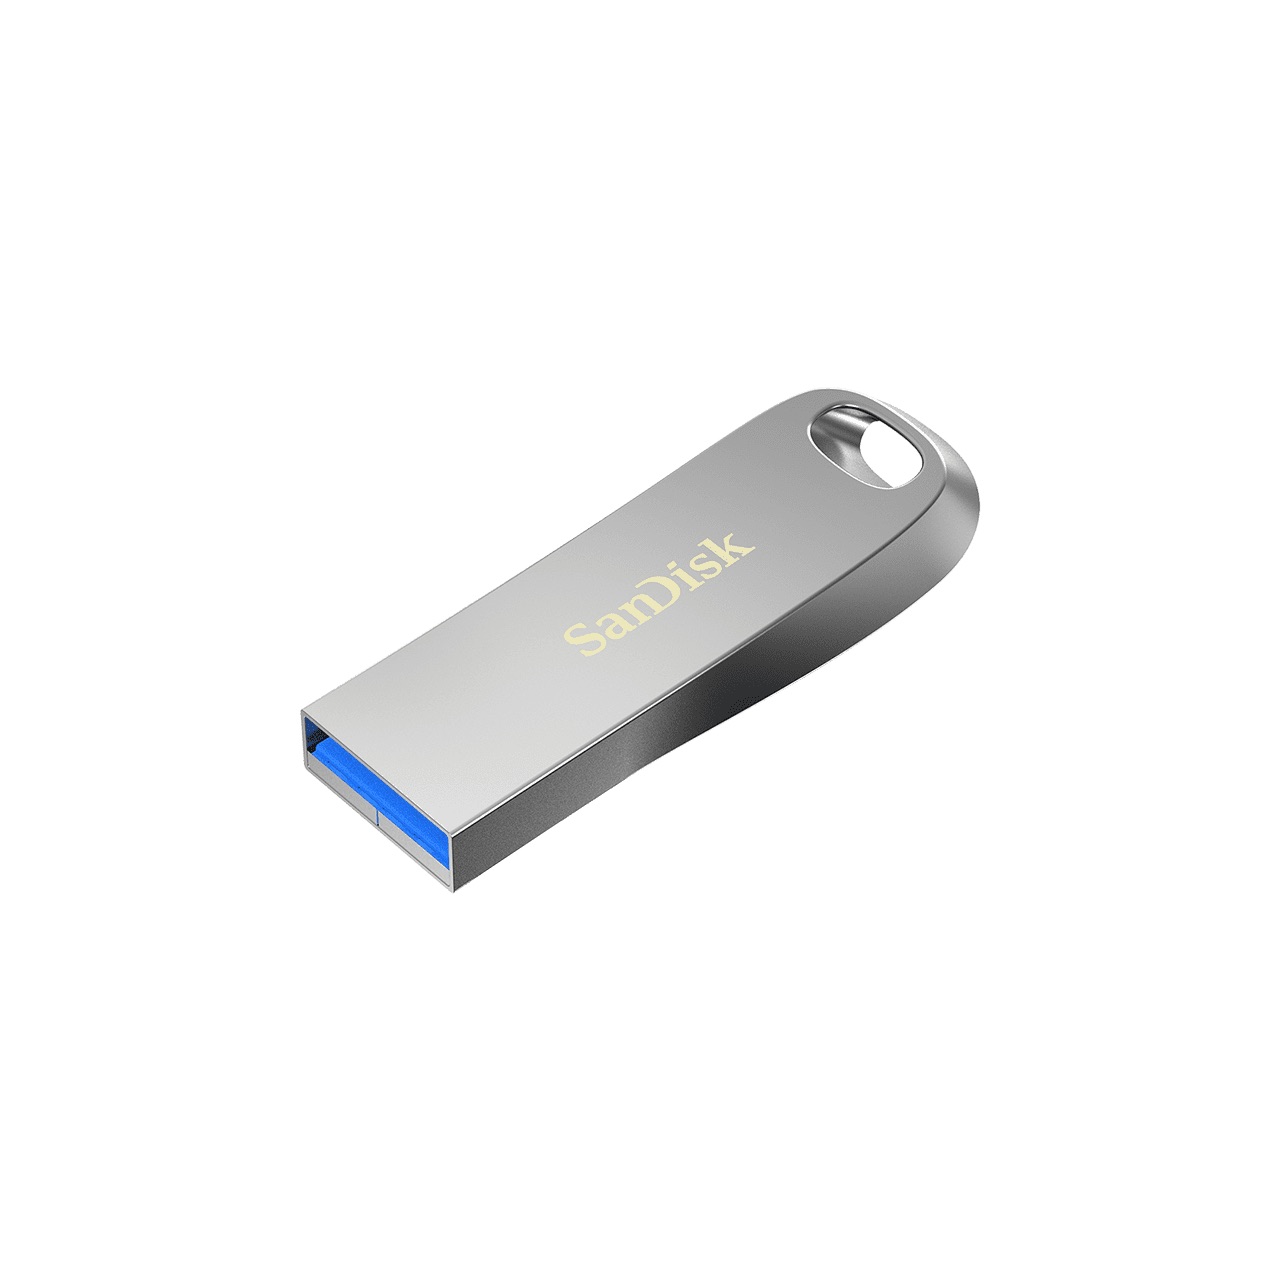 You may also be interested in the SanDisk SDCZ73-064G-A46 Ultra Flair Flash Drive....